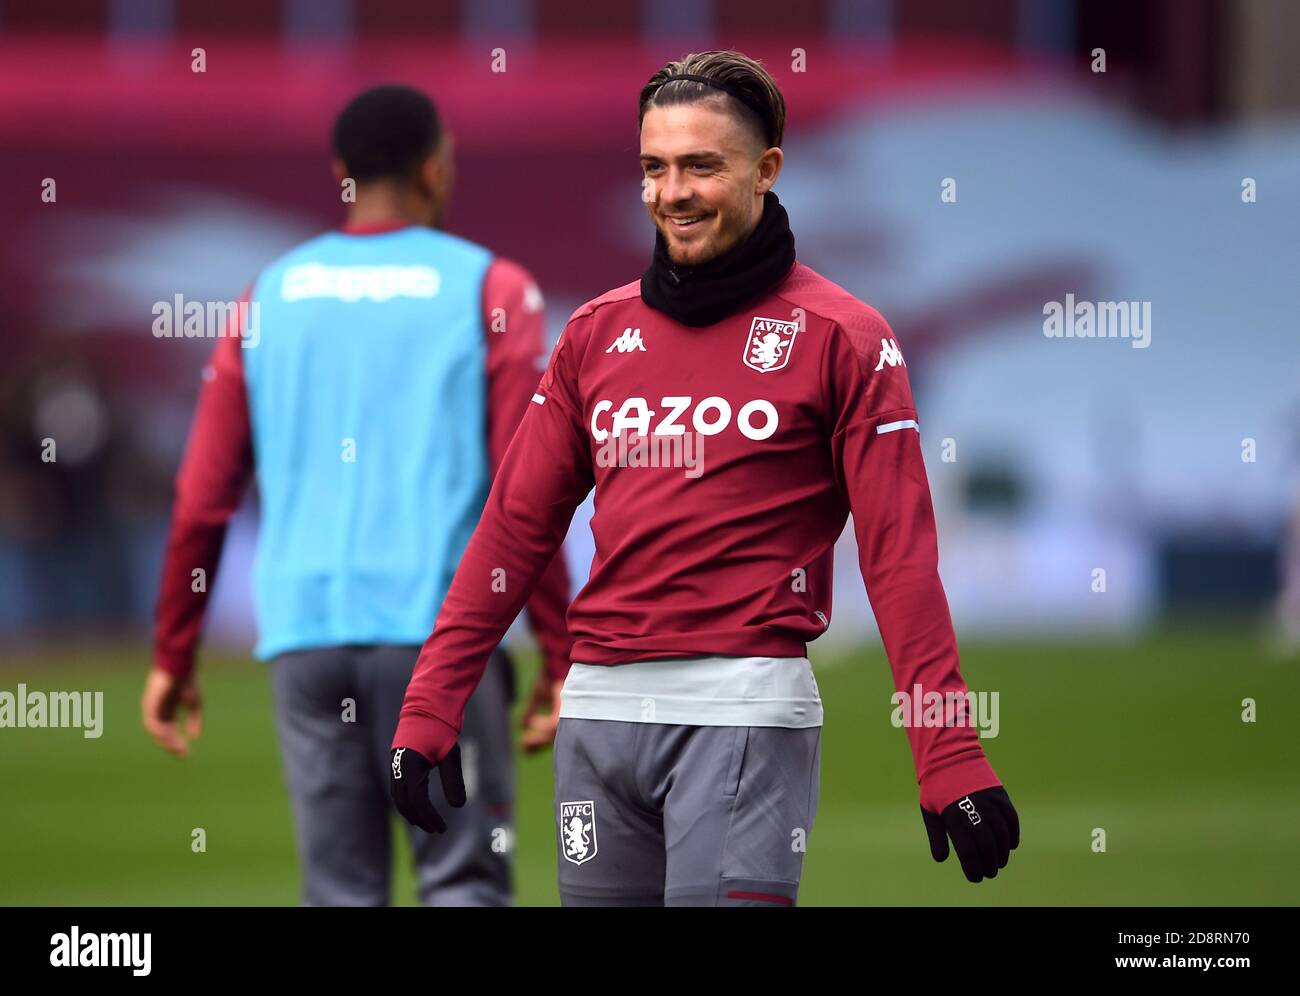 Aston Villa's Jack Grealish is all smiles as he warms up before the Premier League match at Villa Park, Birmingham Stock Photo